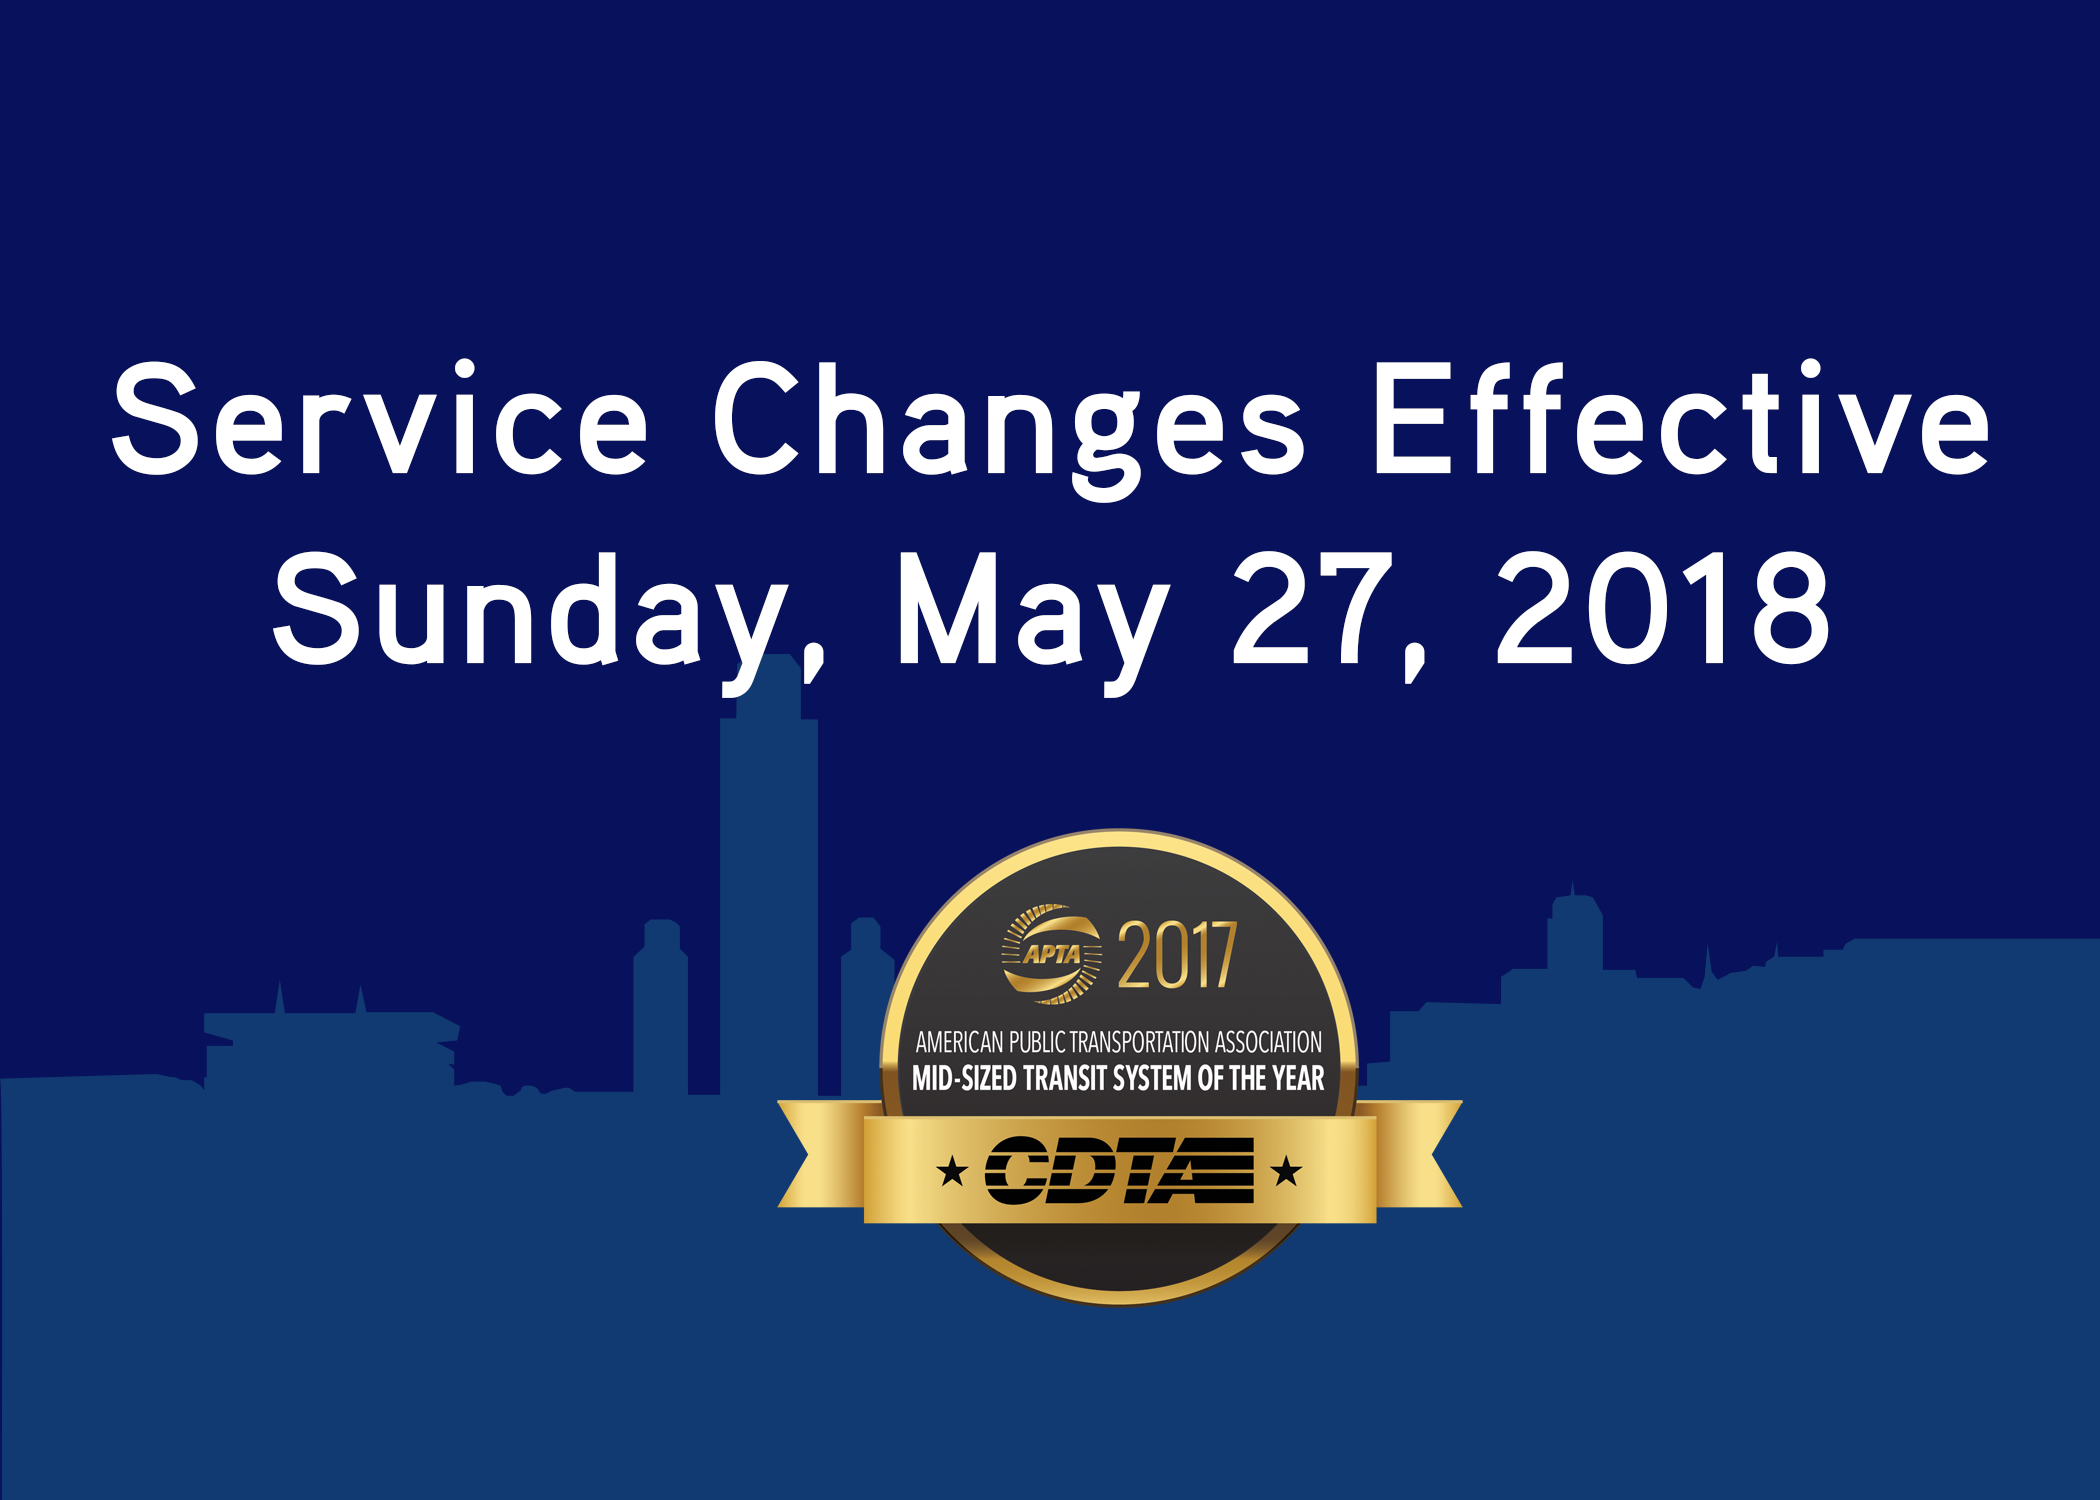 Service Changes Effective Sunday, May 27, 2018